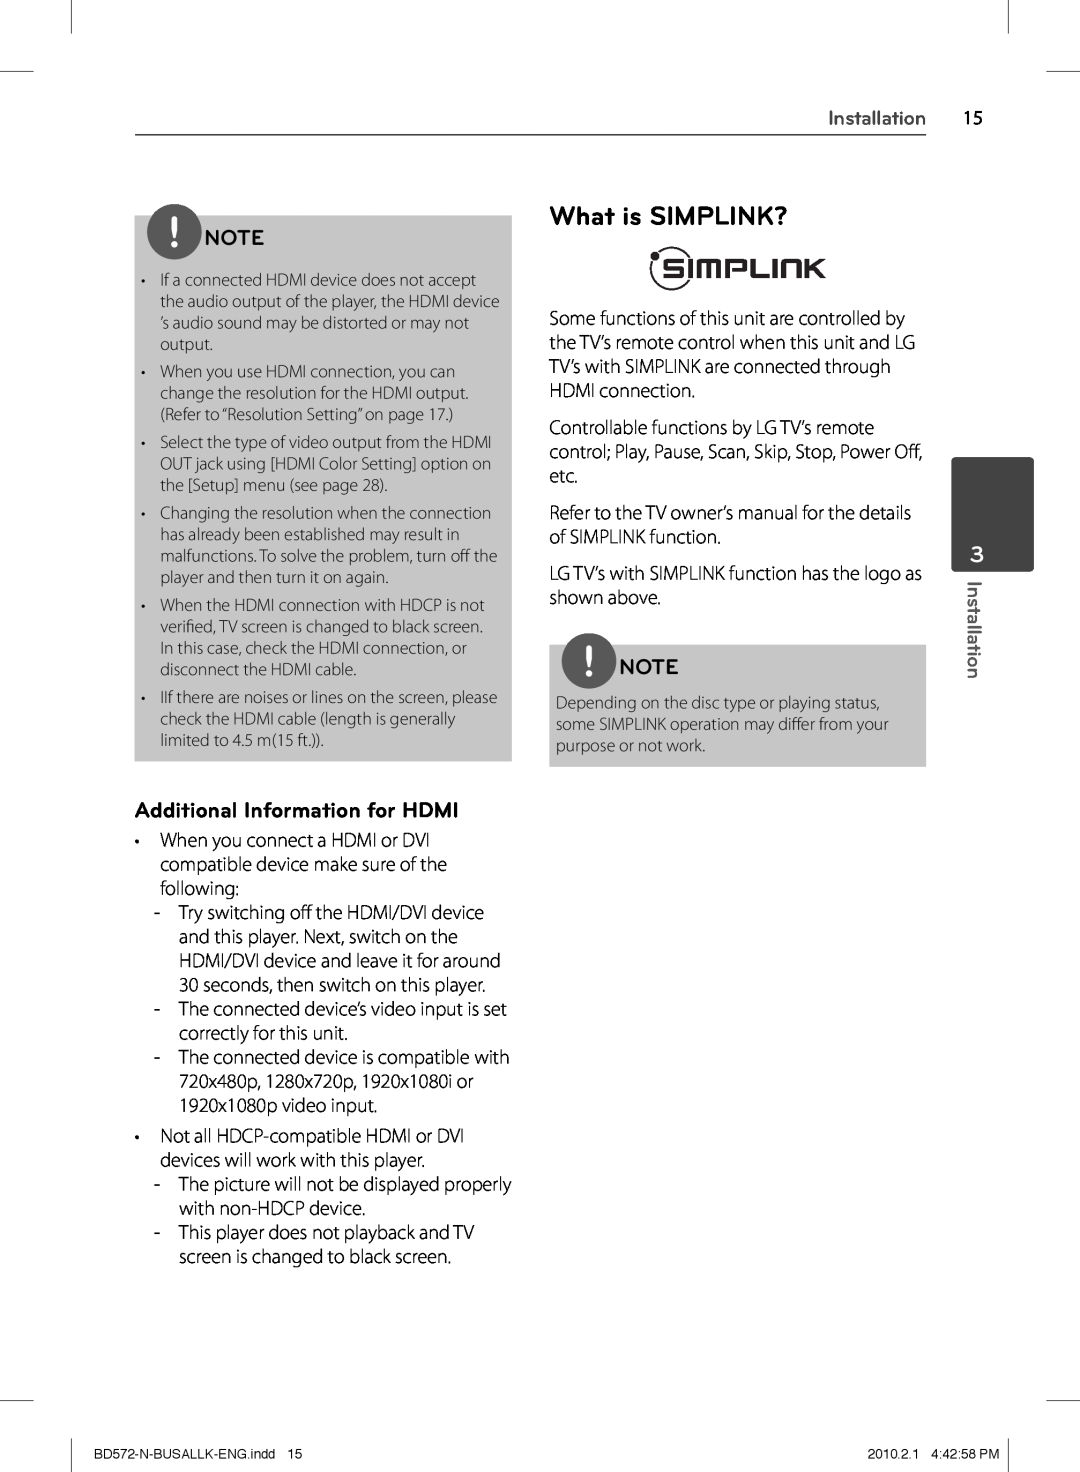 LG Electronics BD570 owner manual What is SIMPLINK?, Additional Information for HDMI, Installation 